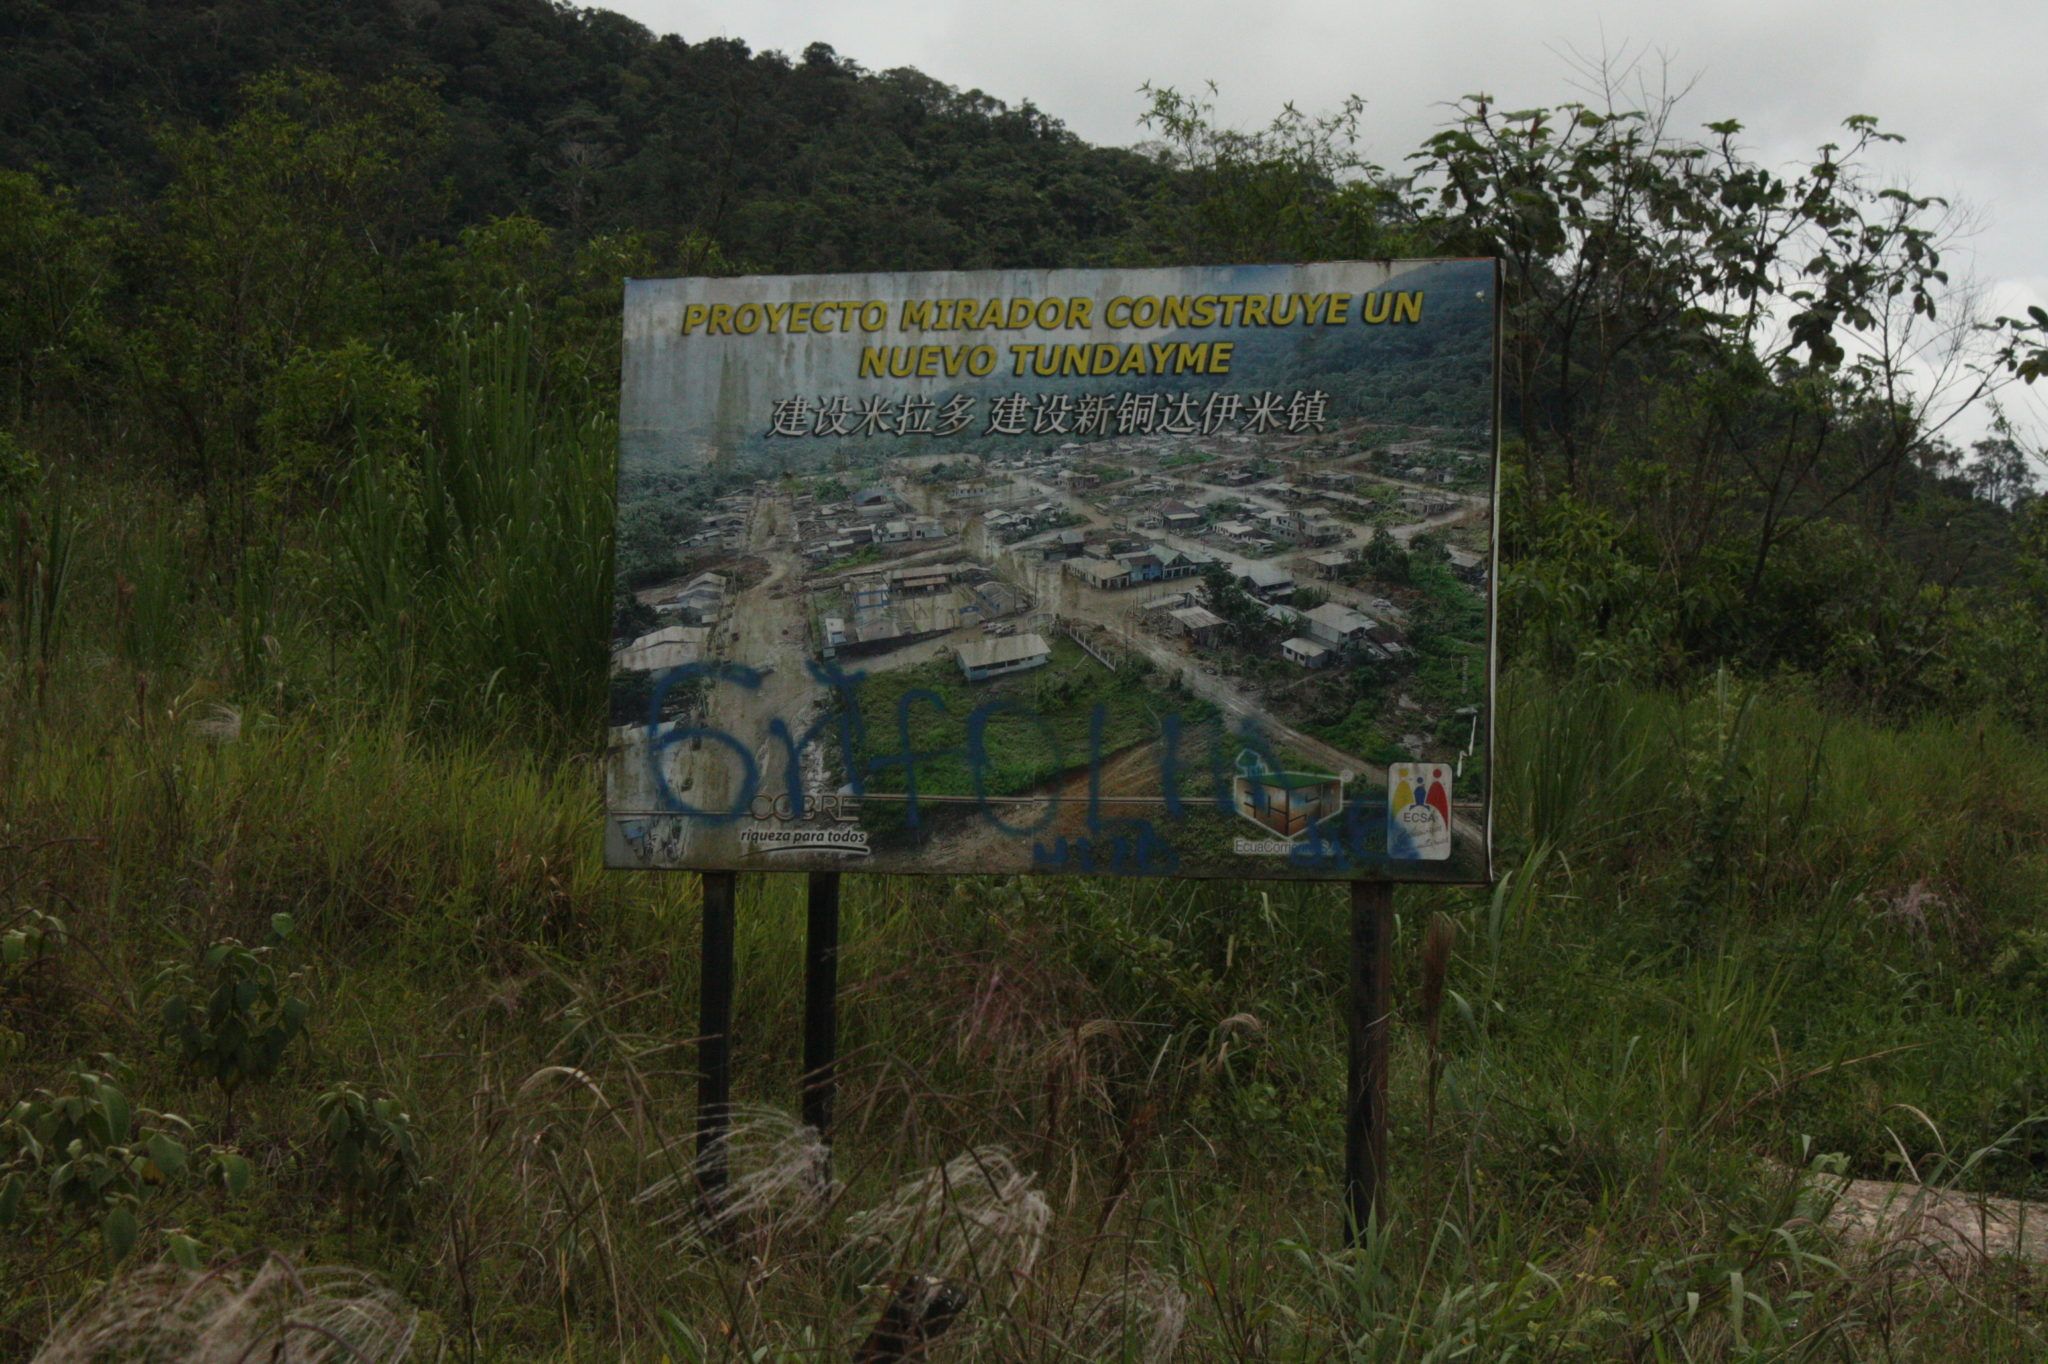 Ecuacorriente had spoken of a relocation plan for the evicted families of San Marcos, but its execution is not so evident. Image by Andrés Bermúdez Liévano. Ecuador, 2019.